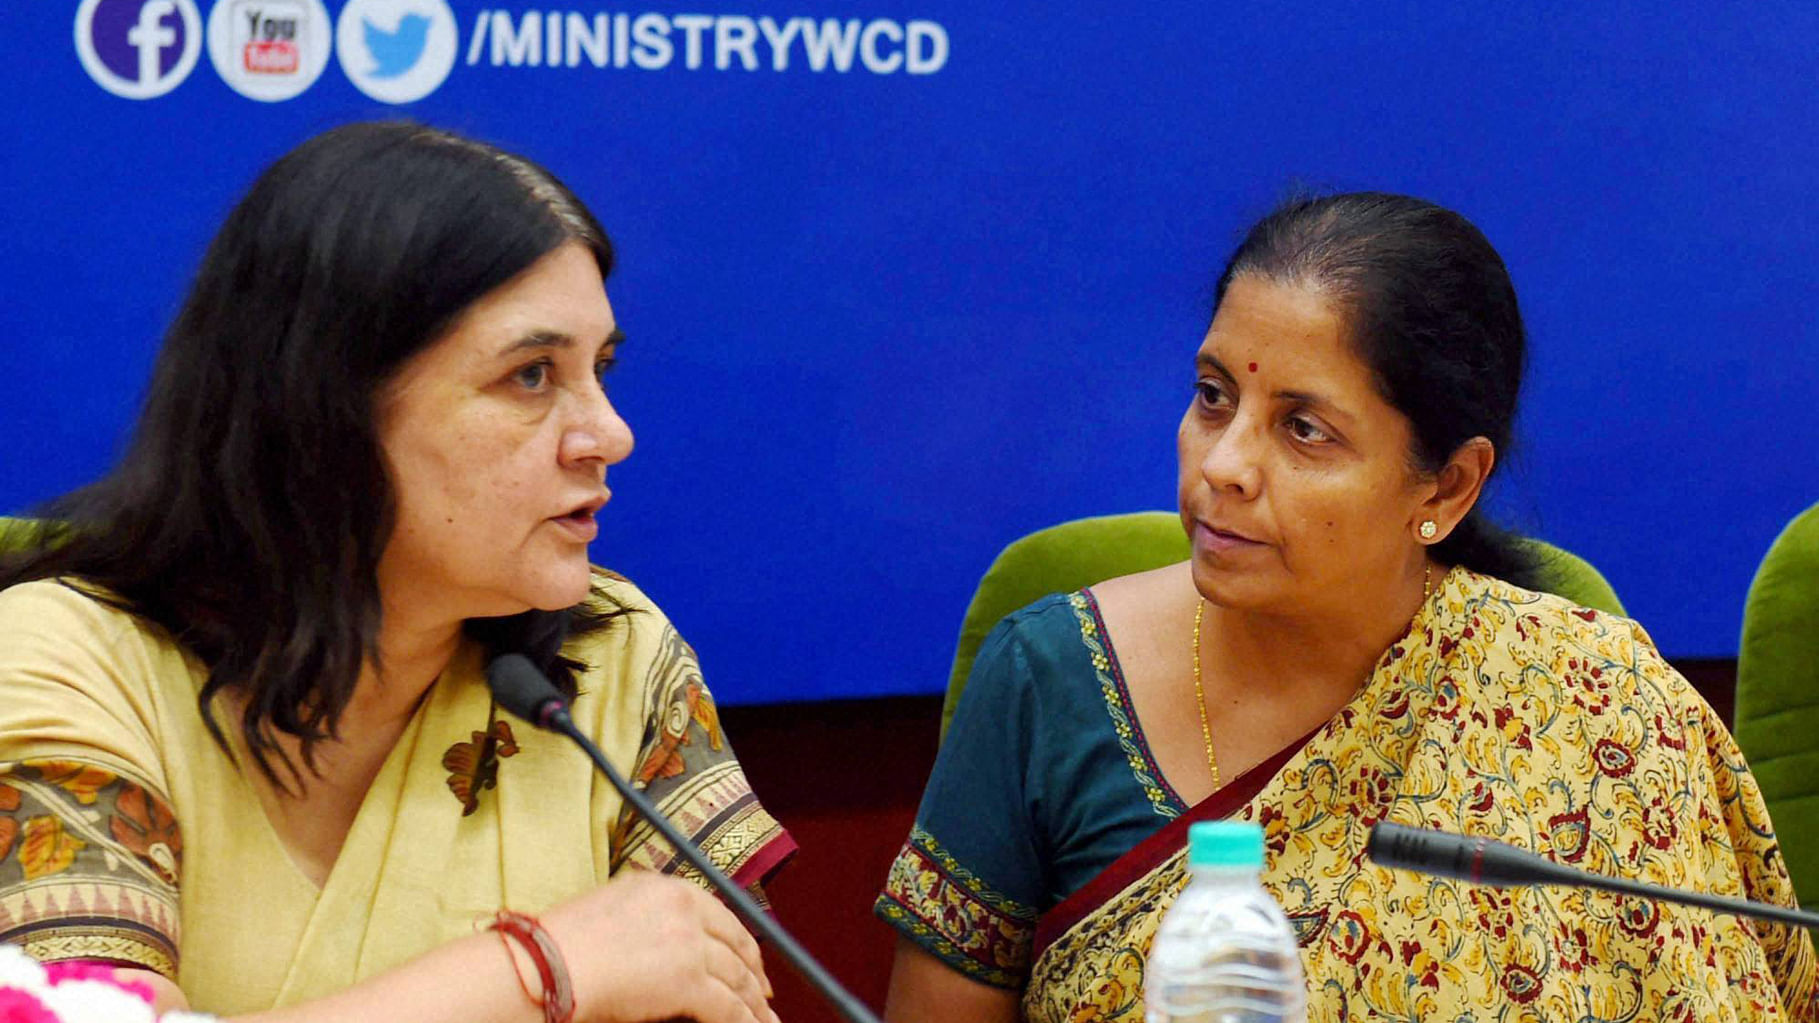 Union Minister for Women and Child Development, Maneka Gandhi (L) with Commerce Minister Nirmala Sitharaman during the All India Women Journalists’ workshop  in New Delhi on Tuesday. (Photo: PTI)